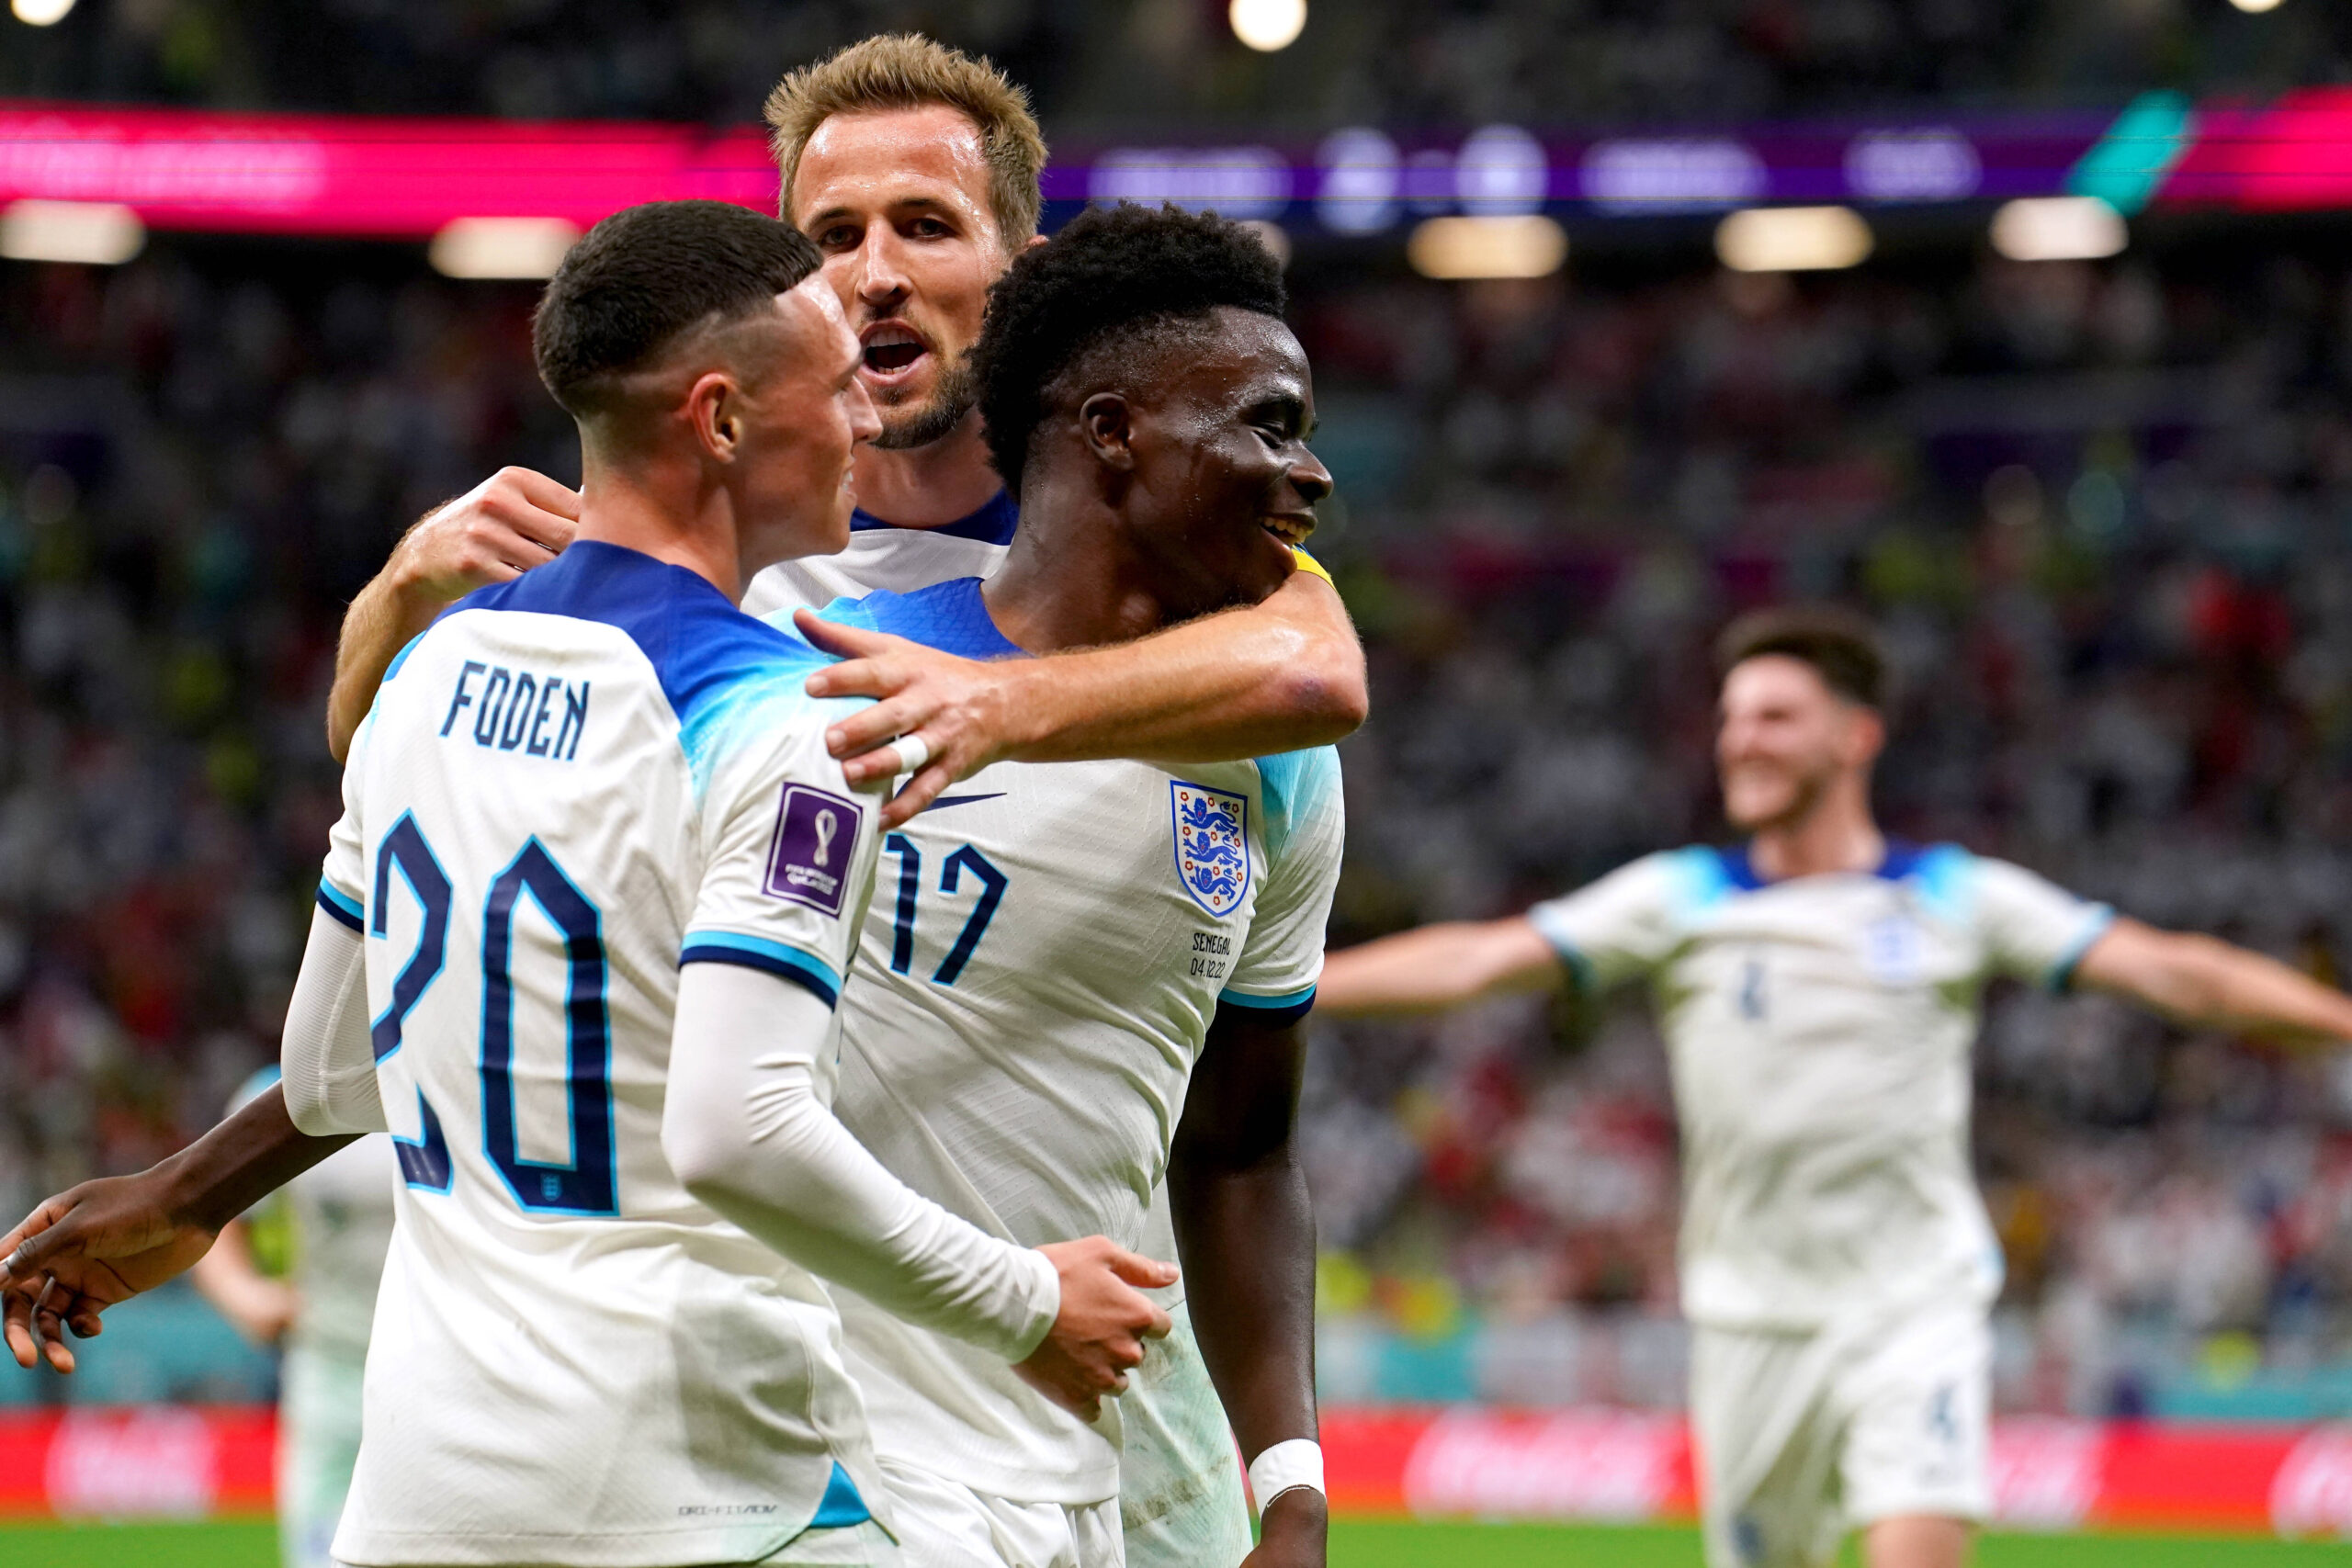 England players celebrate a goal at the World Cup